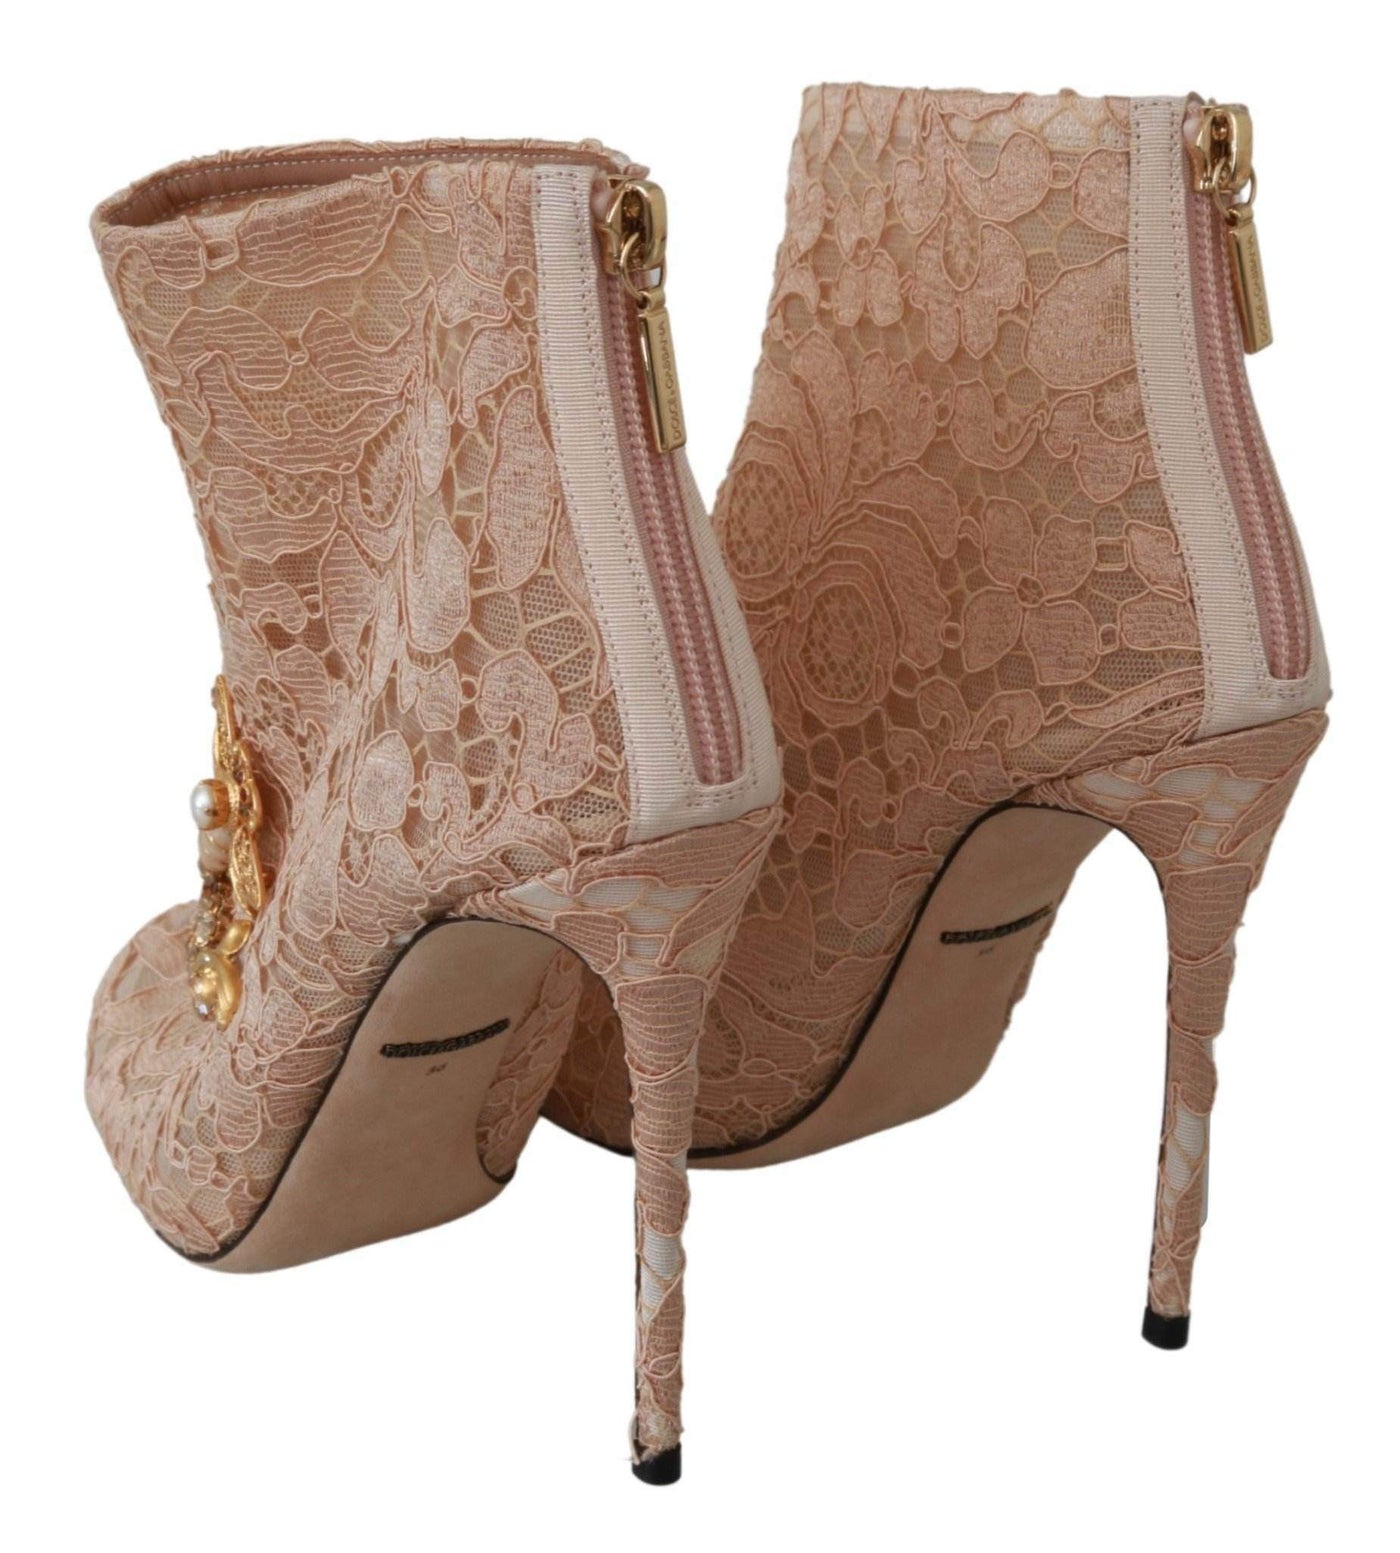 Dolce & Gabbana  Pink Crystal Lace Booties Stilettos Shoes #women, Brand_Dolce & Gabbana, Catch, Category_Shoes, Dolce & Gabbana, EU36/US5.5, feed-agegroup-adult, feed-color-pink, feed-gender-female, feed-size-US5.5, Gender_Women, Kogan, Pink, Sandals - Women - Shoes, Shoes - New Arrivals at SEYMAYKA